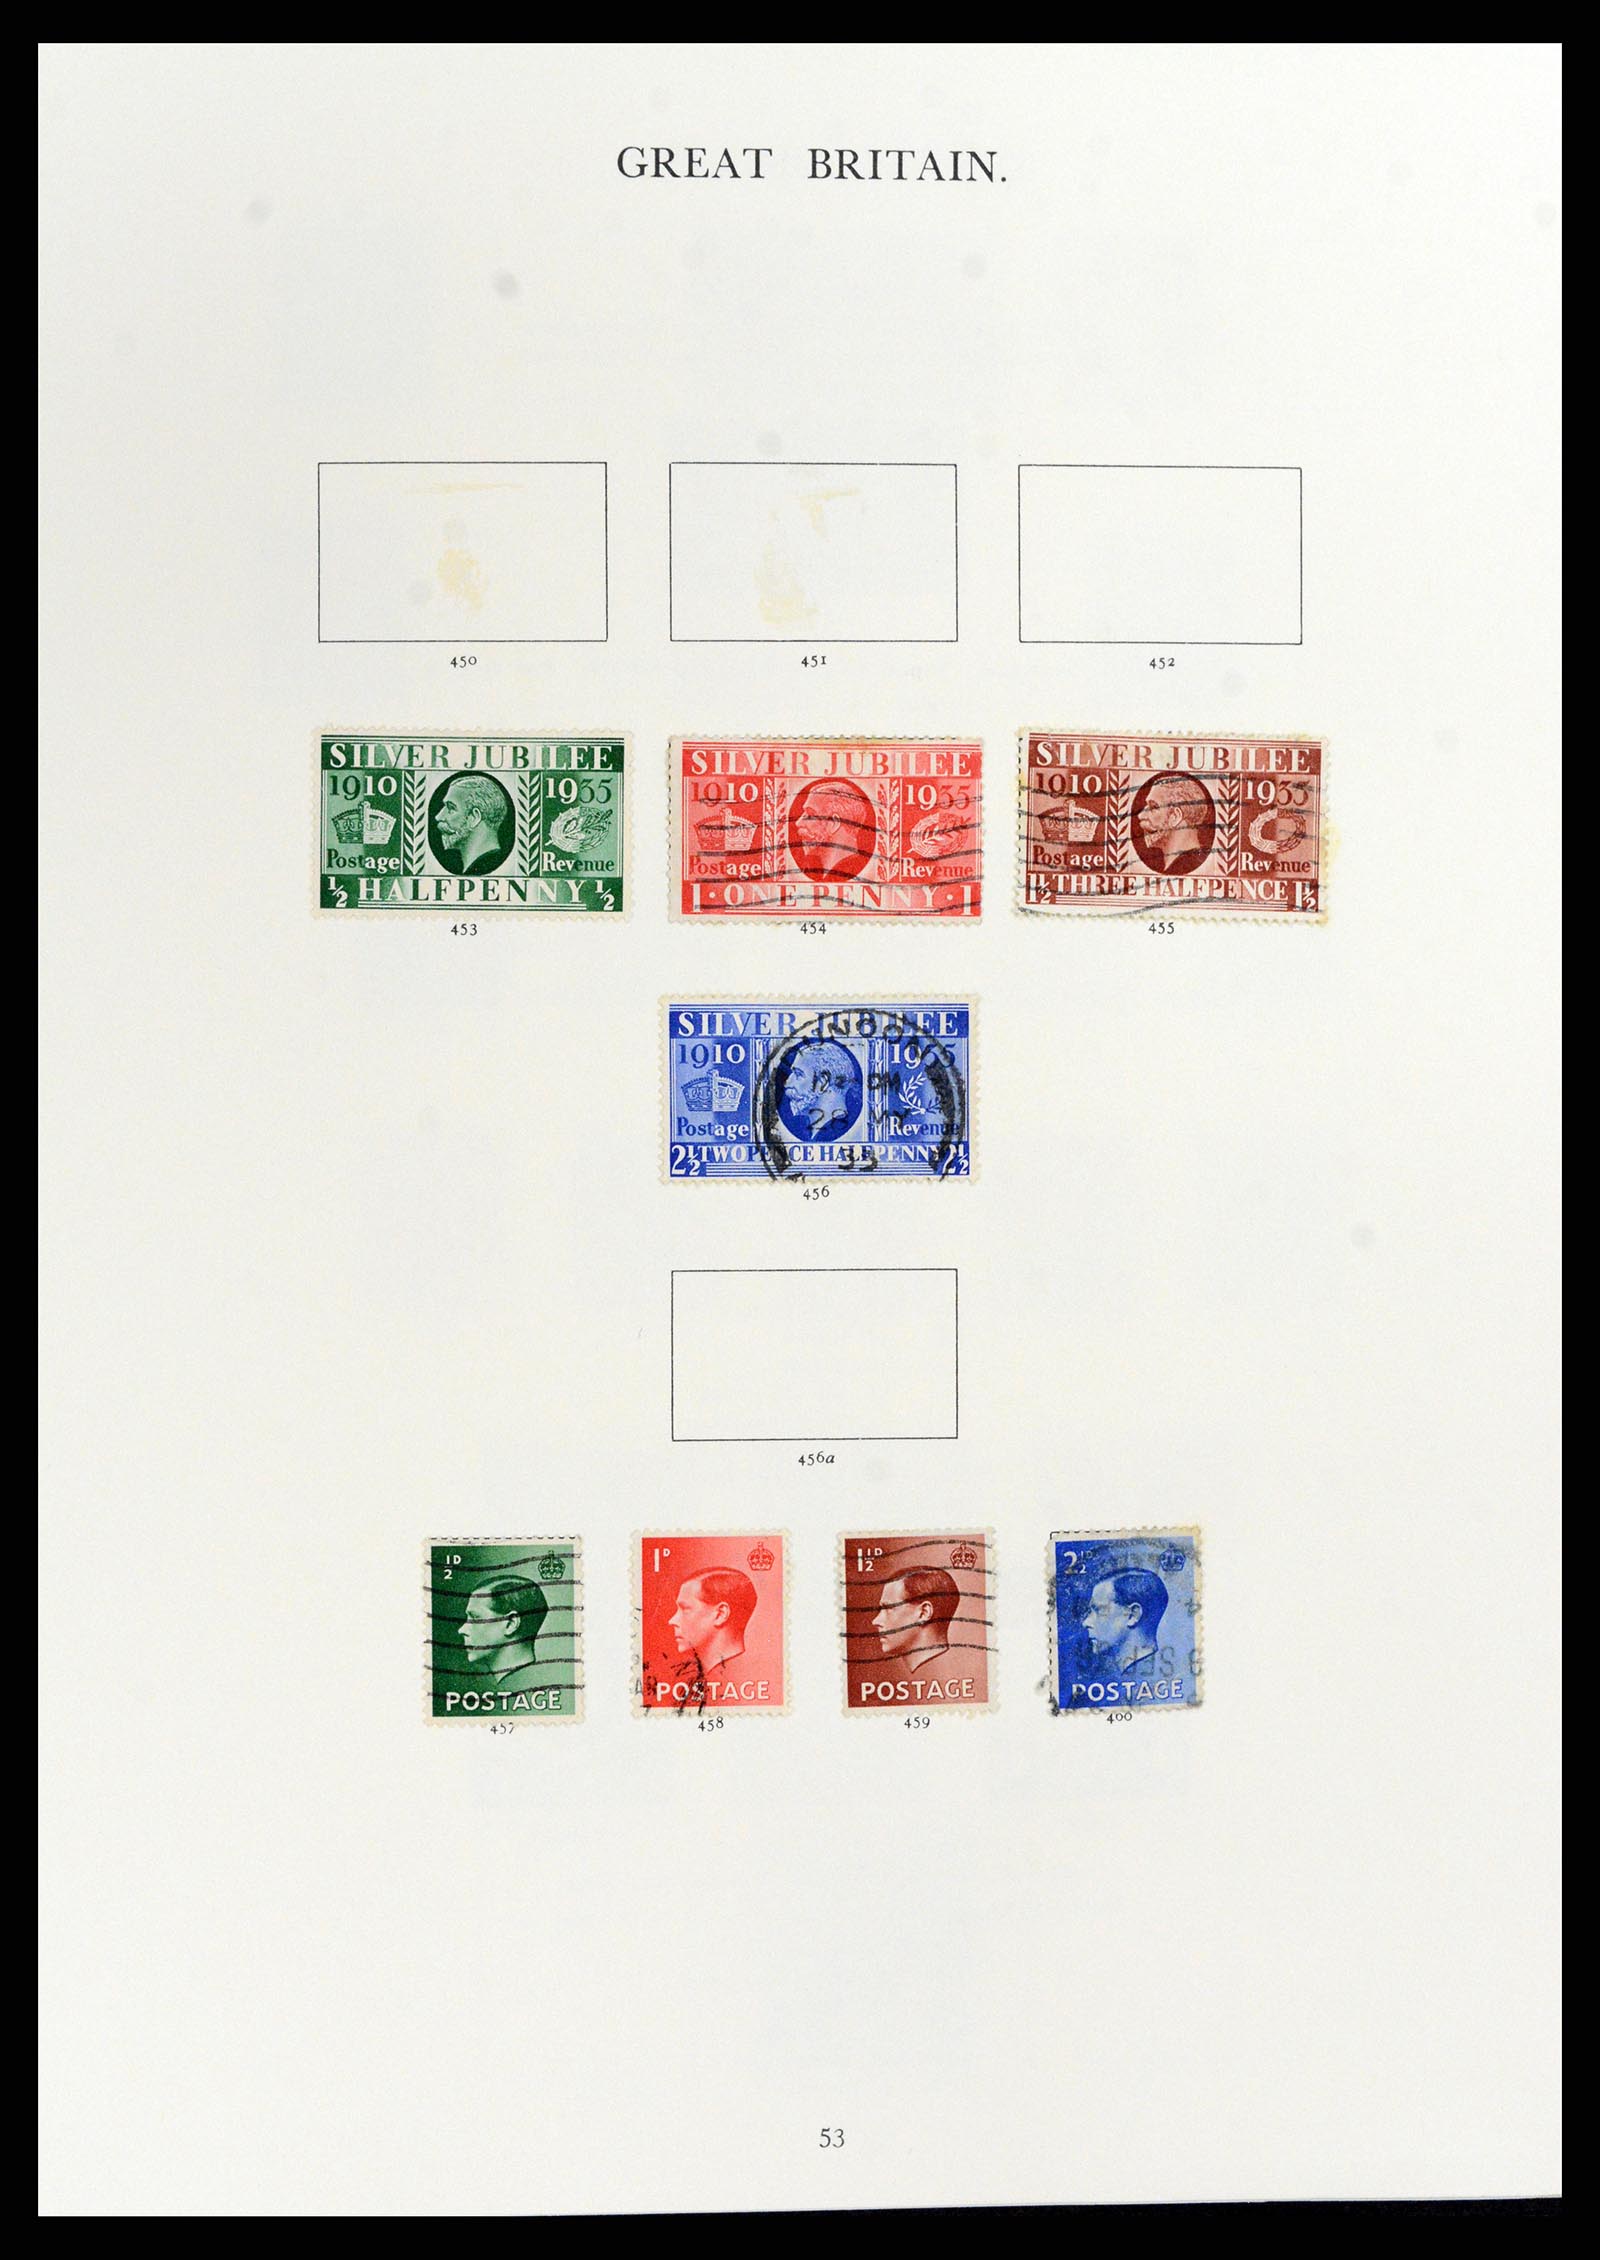 37759 023 - Stamp collection 37759 Great Britain and Colonies in Europe 1858-2005.